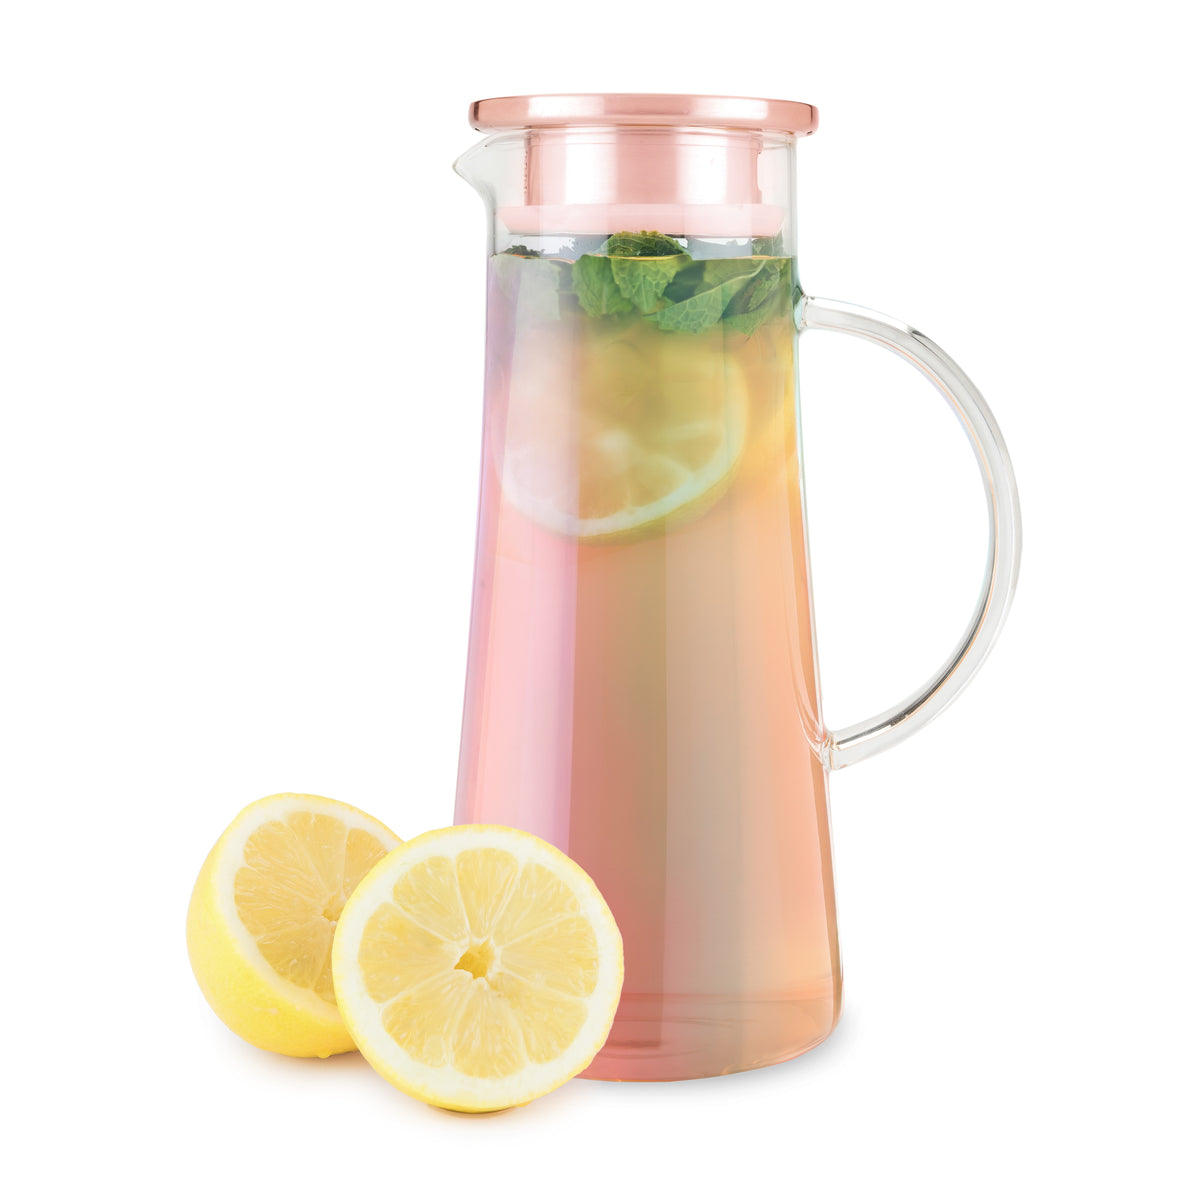 54oz Water Pitcher Glass Pitcher Tea Kettle Large Pitcher GlassTeapot  Carafe Cold Juice Iced Drinking Jug for Boiling Water